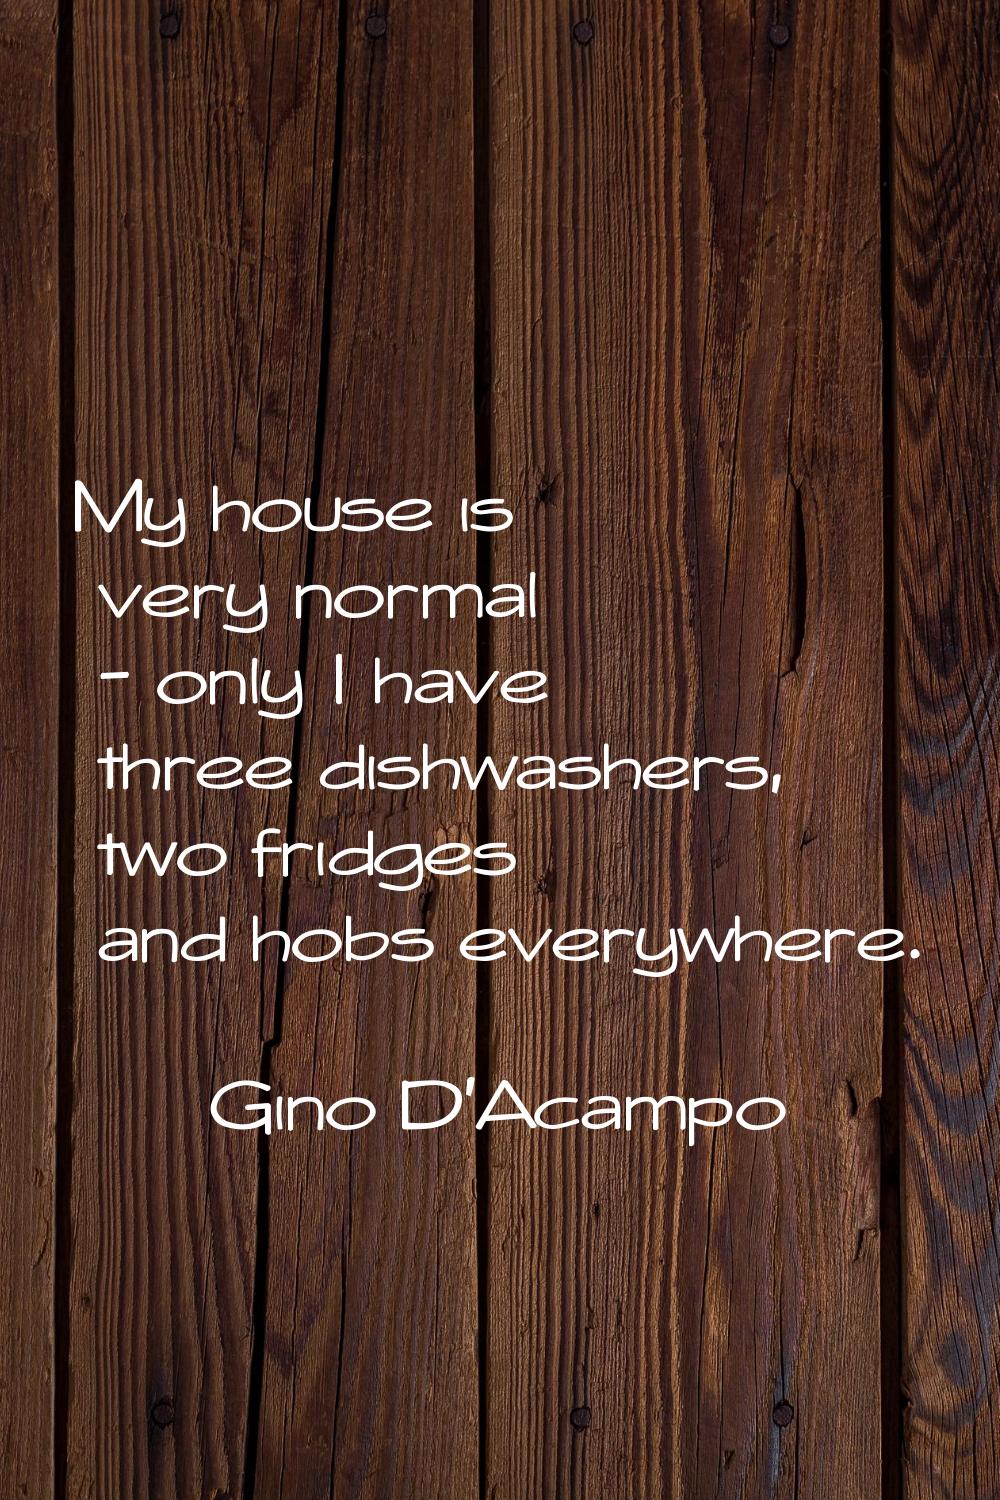 My house is very normal - only I have three dishwashers, two fridges and hobs everywhere.